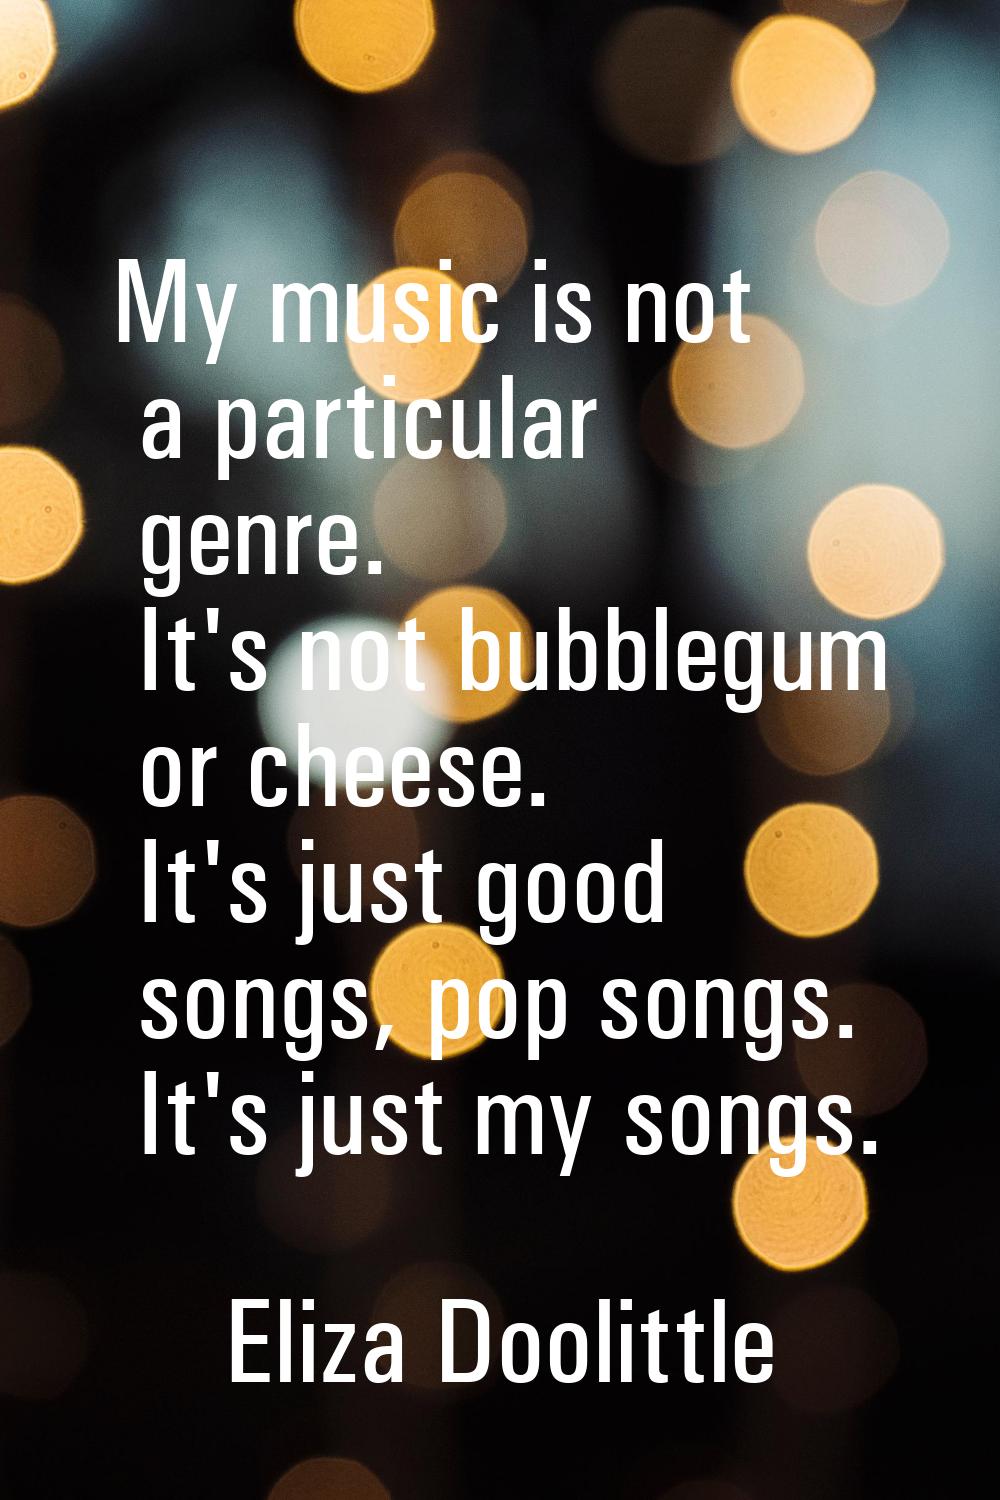 My music is not a particular genre. It's not bubblegum or cheese. It's just good songs, pop songs. 